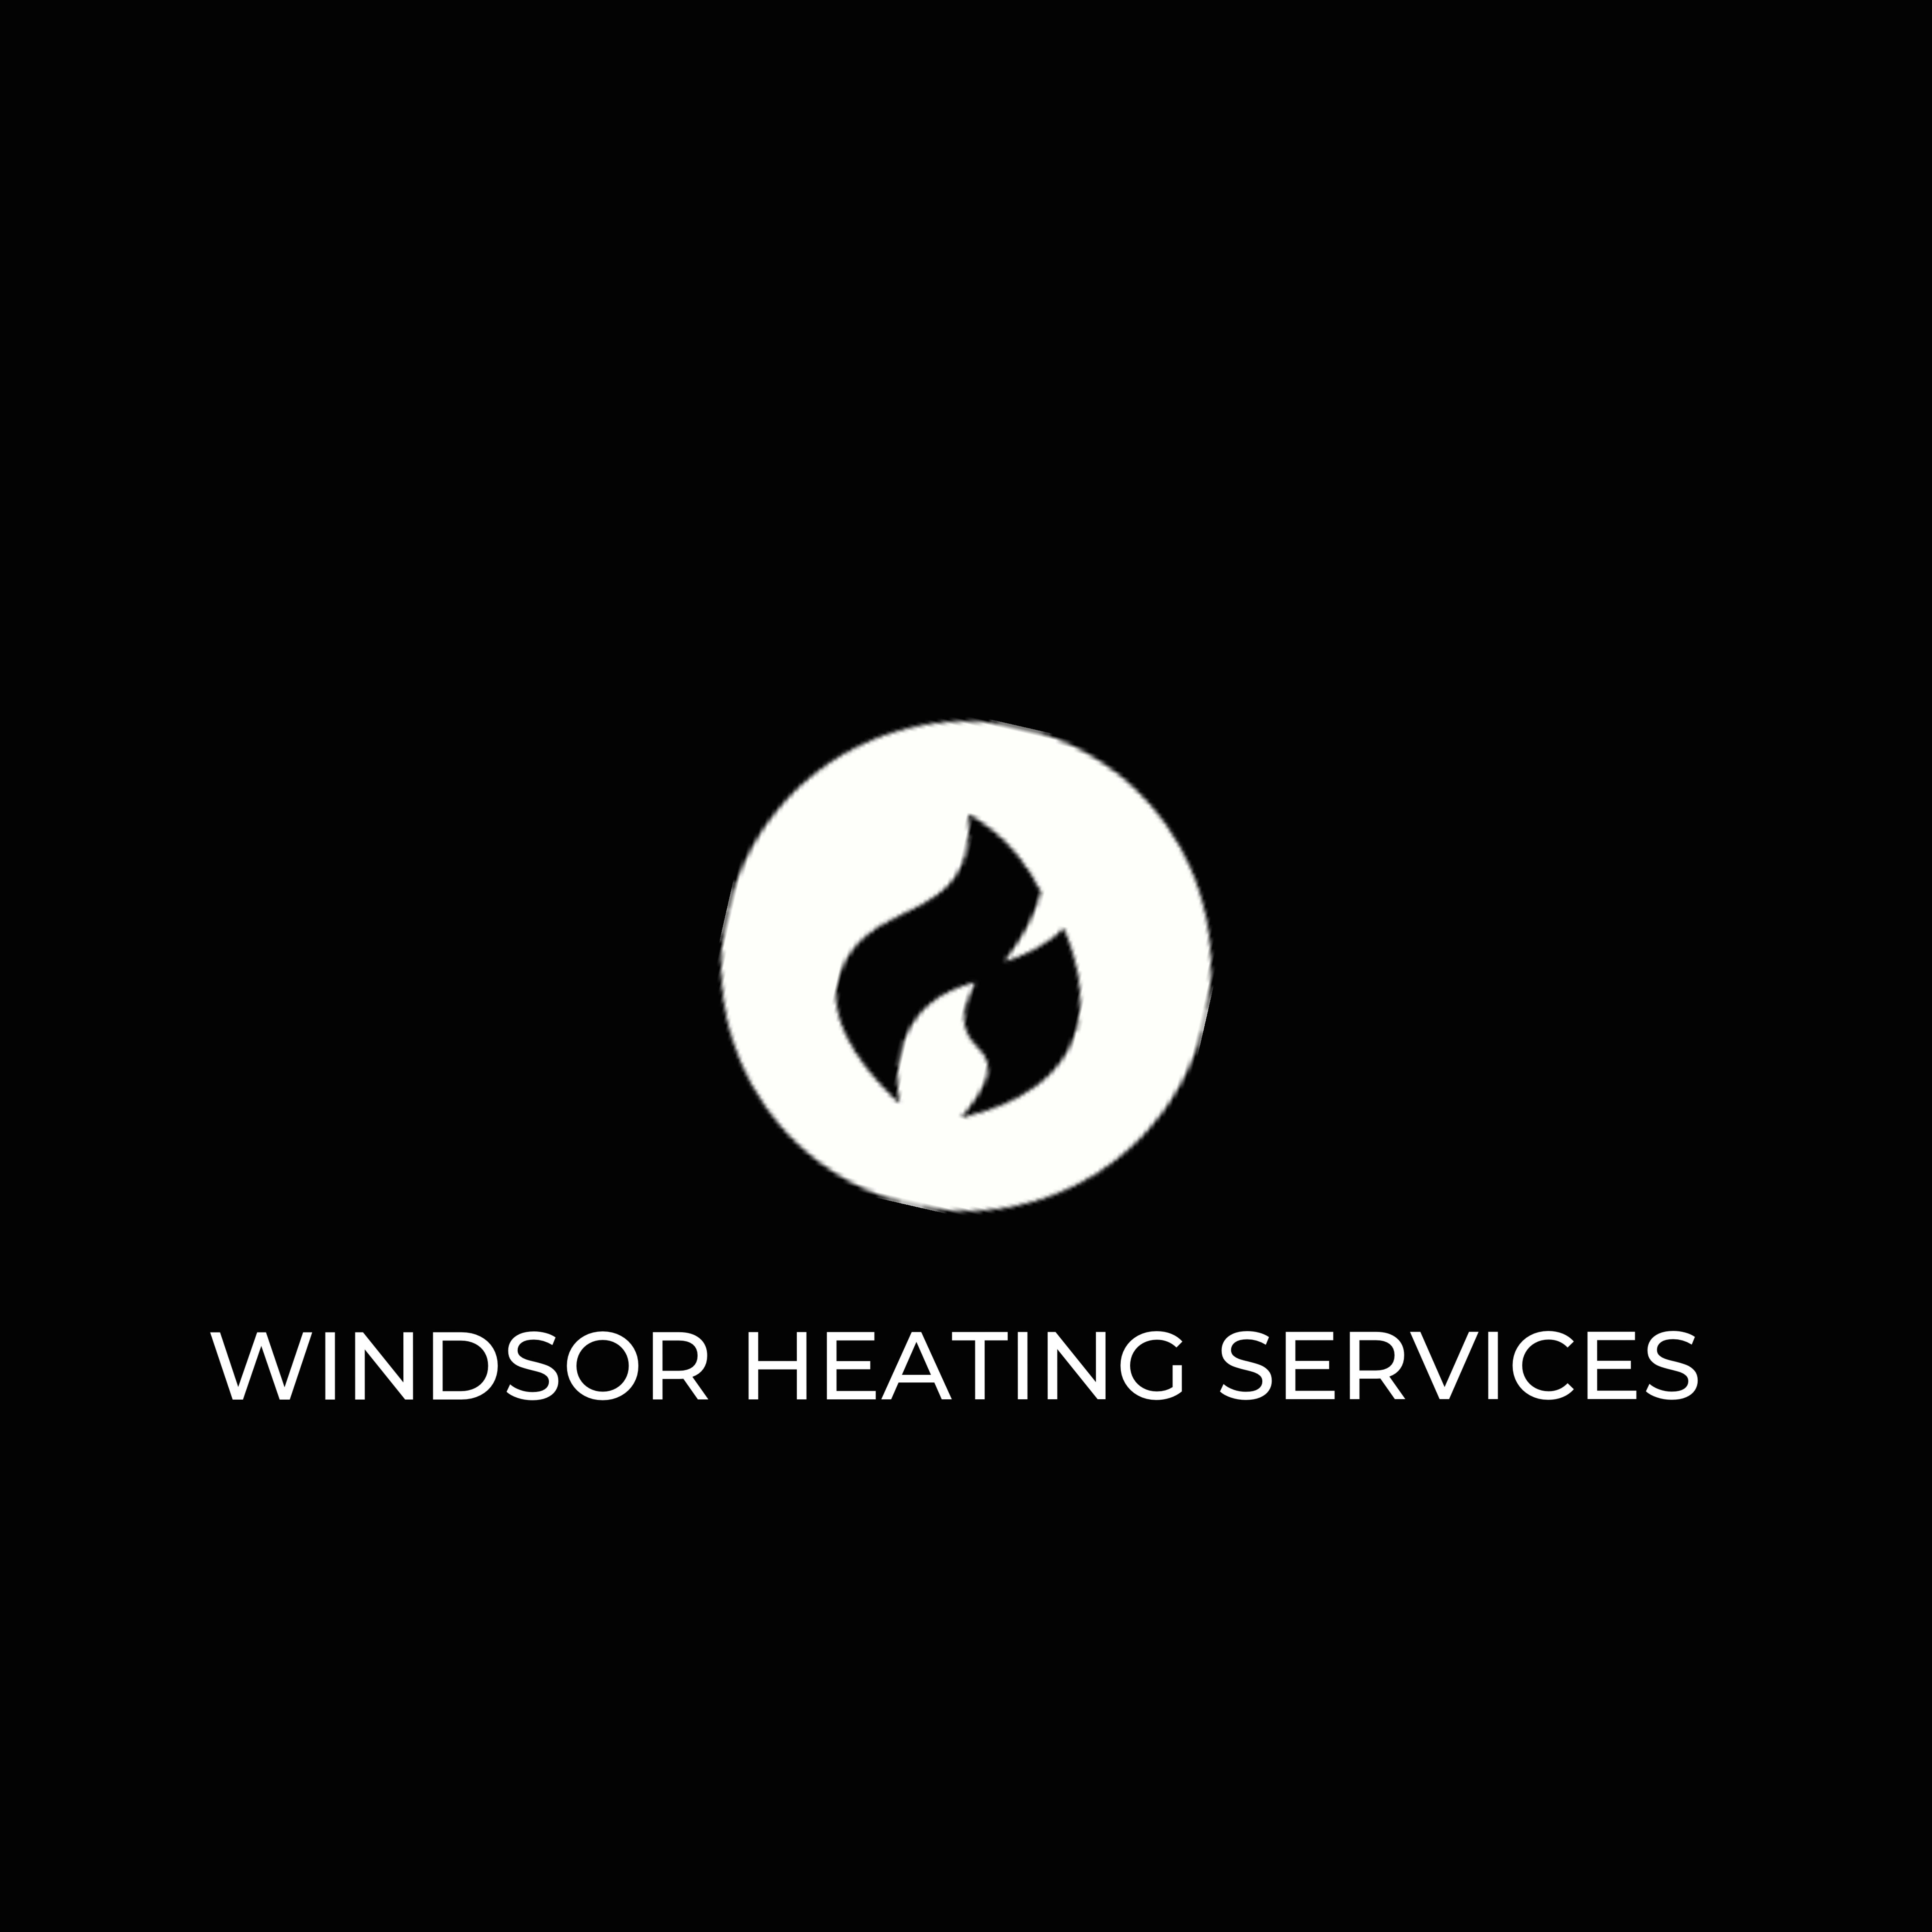 Windsor Heating Services